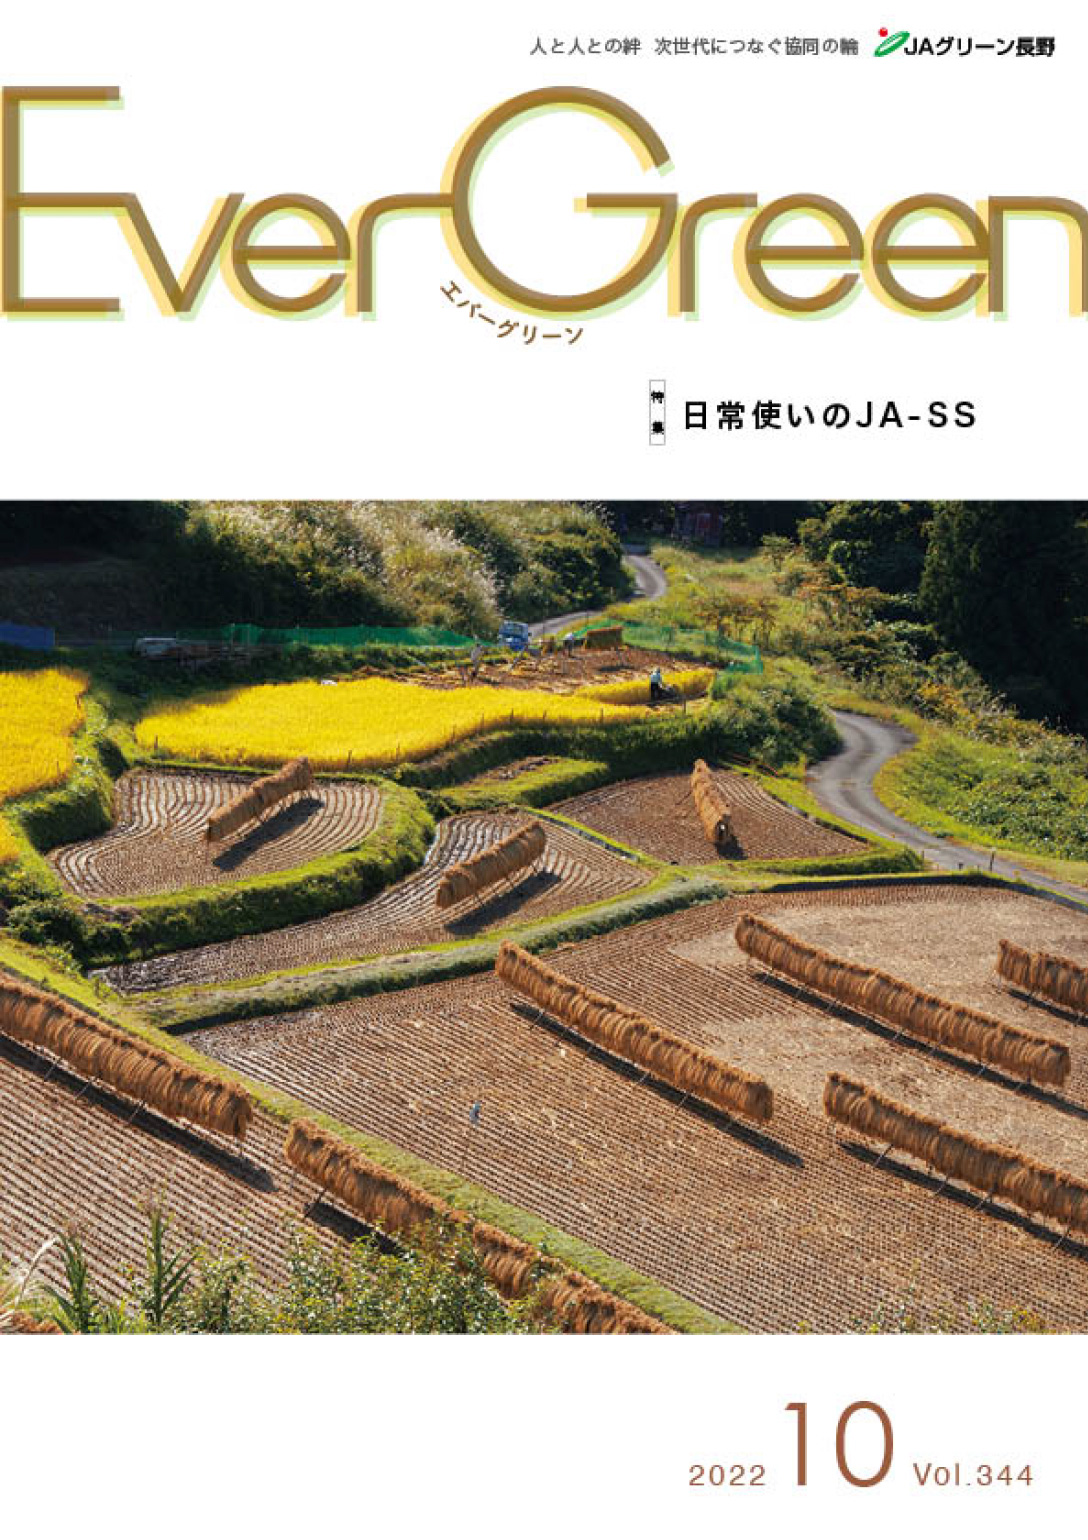 Ever Green10月号発行のご案内